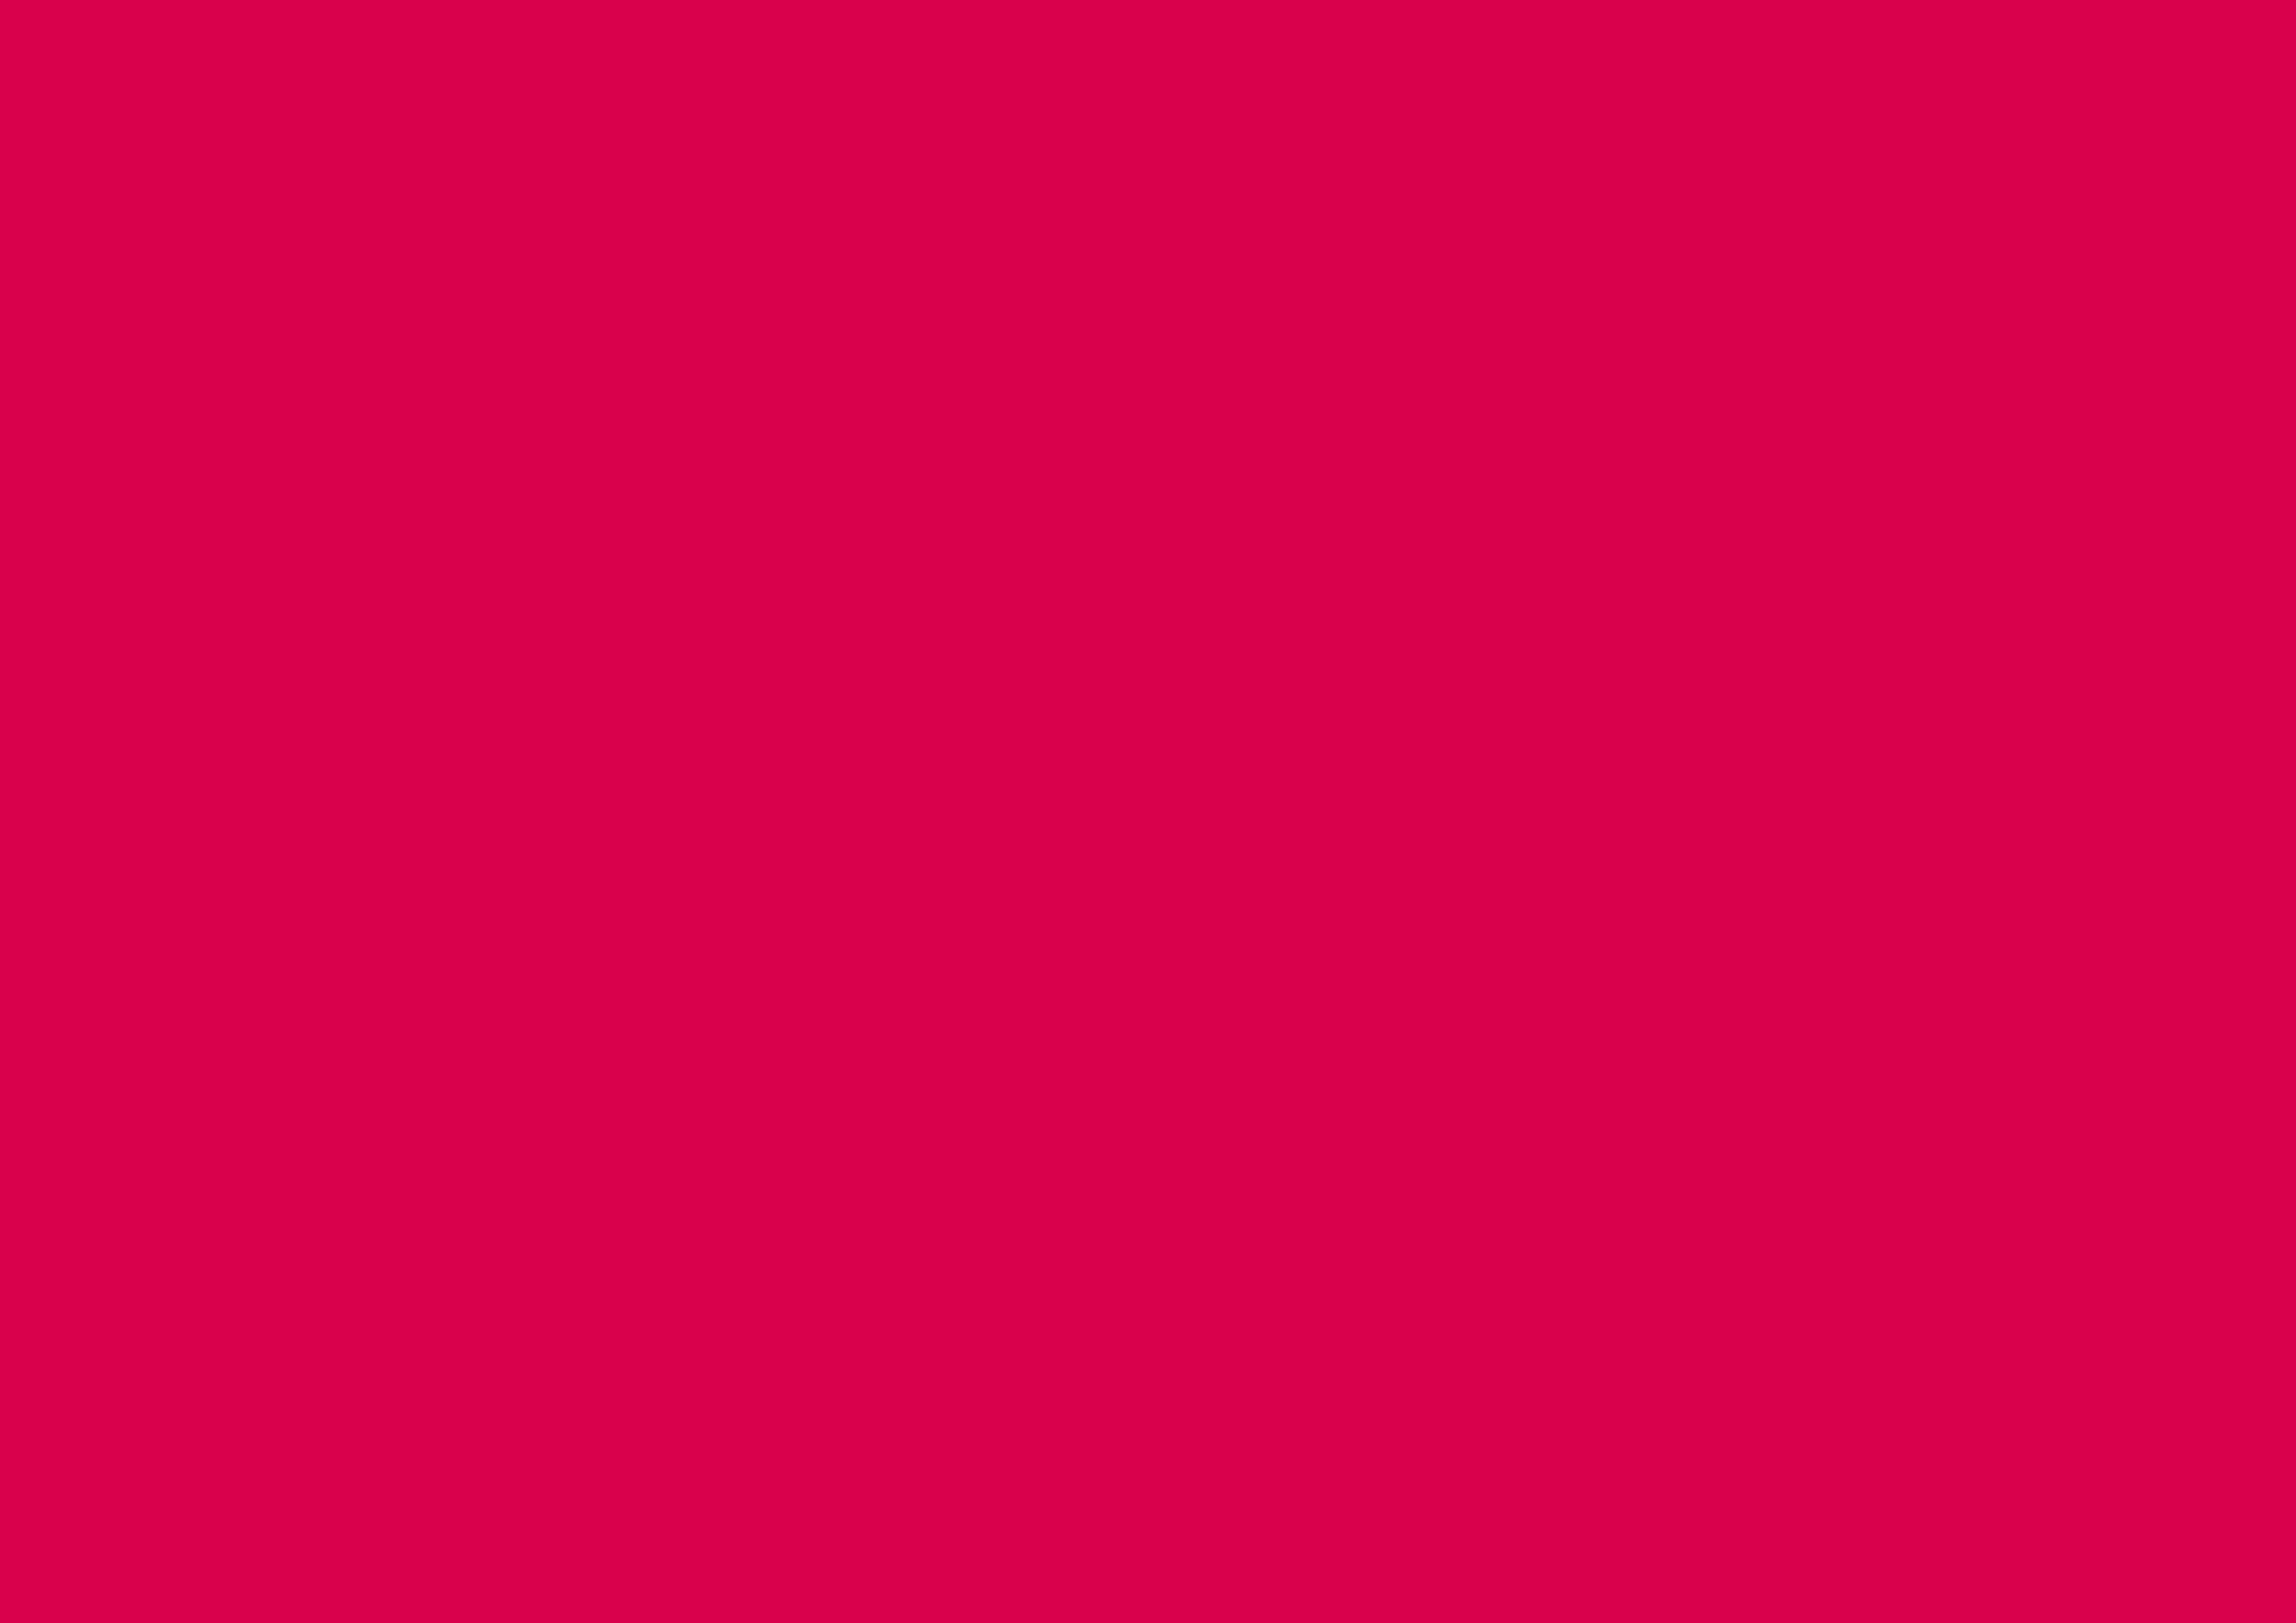 3508x2480 UA Red Solid Color Background